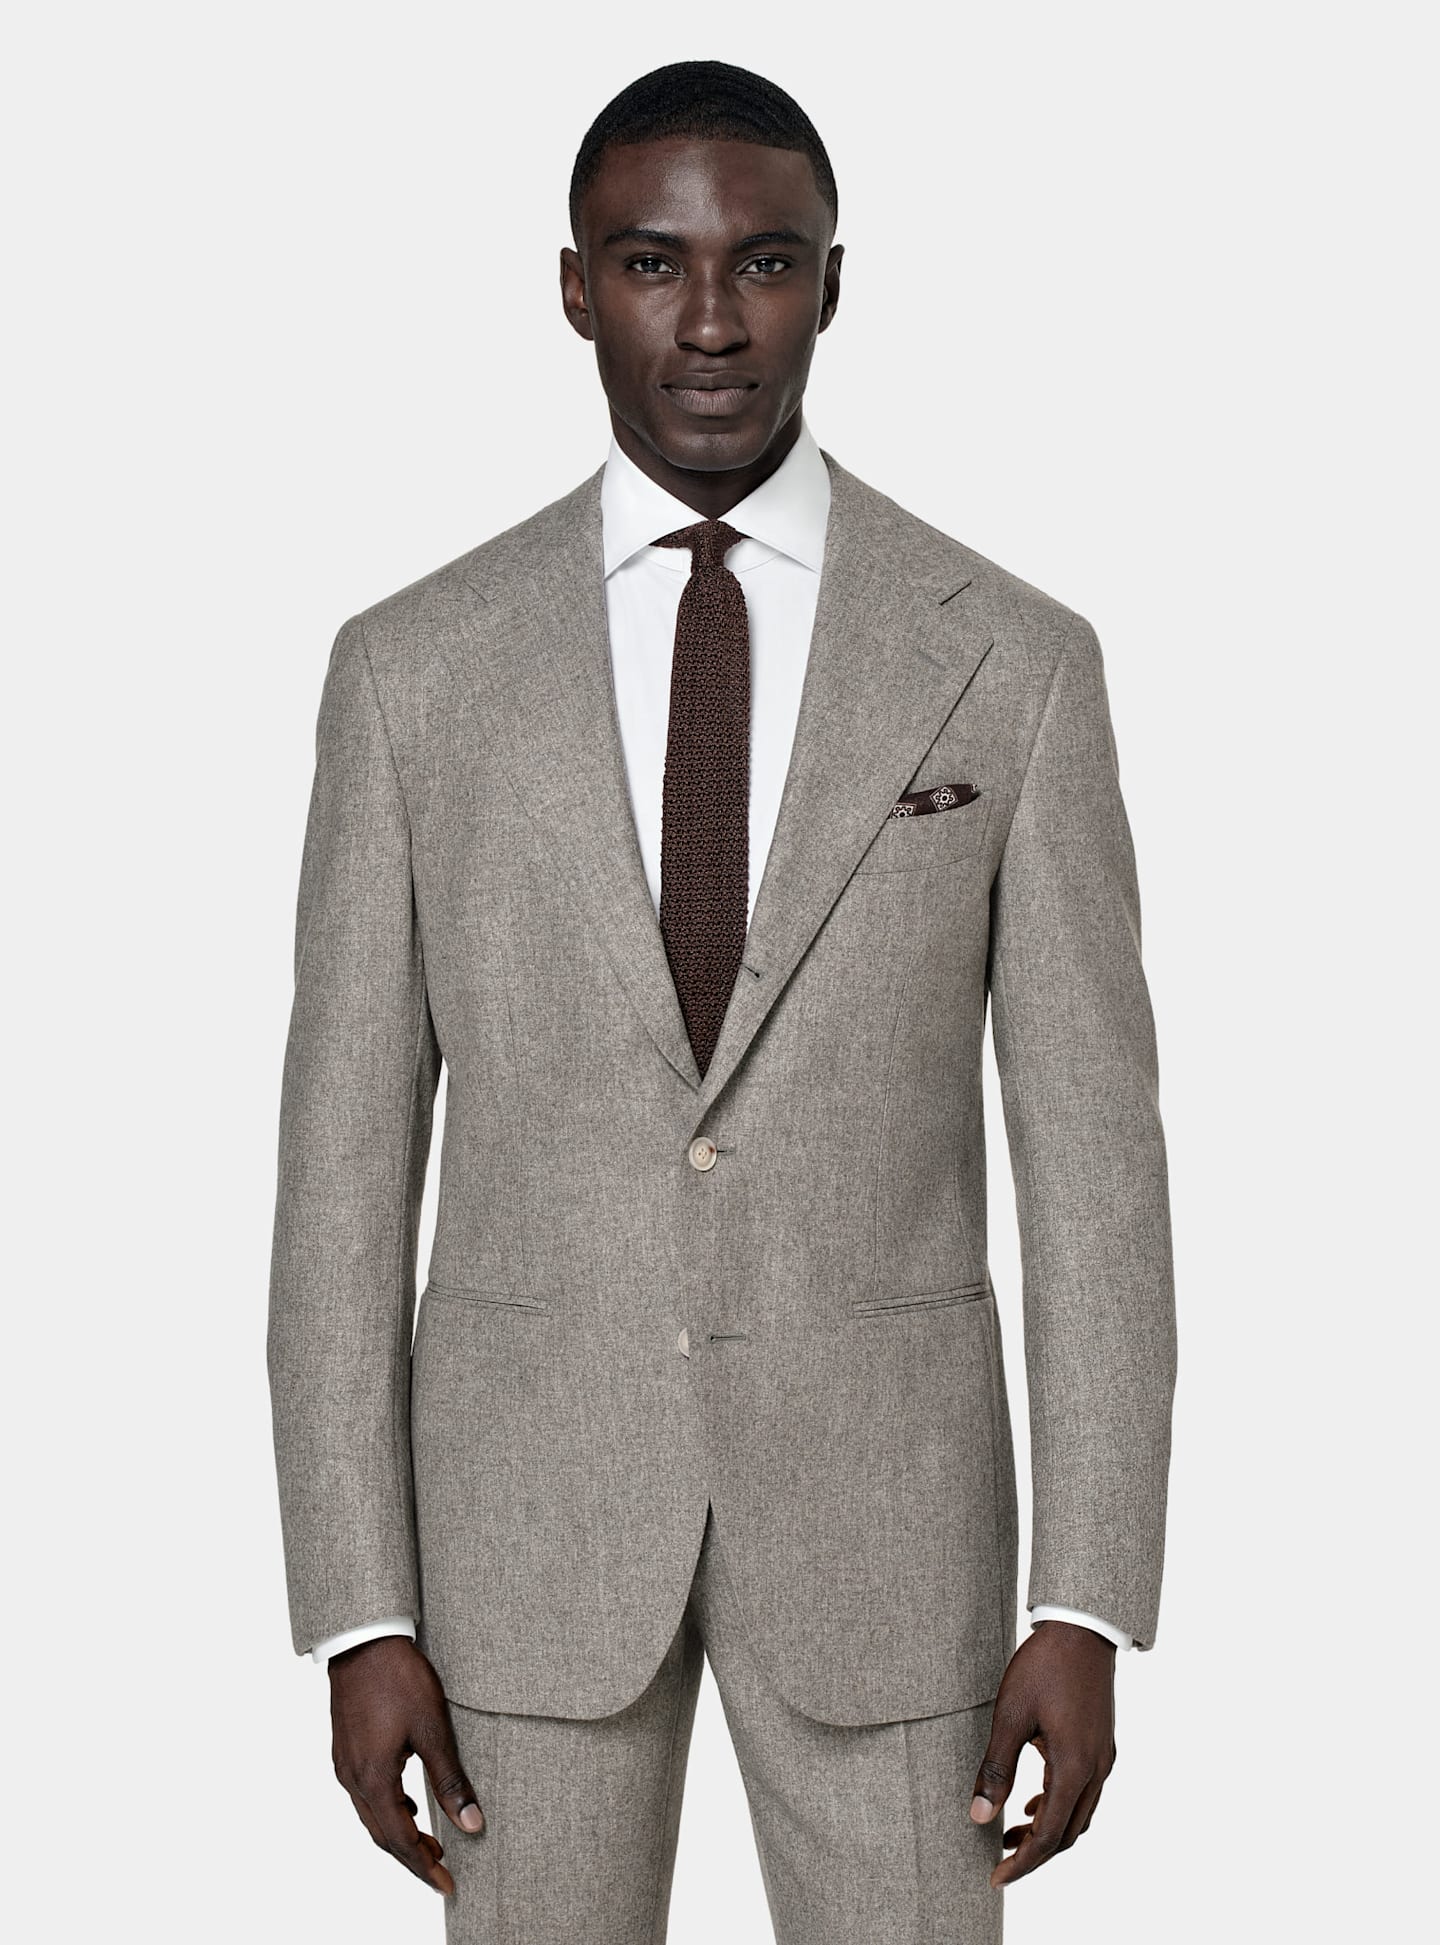 Grey single-breasted suit with brown knitted silk tie and pocket square.